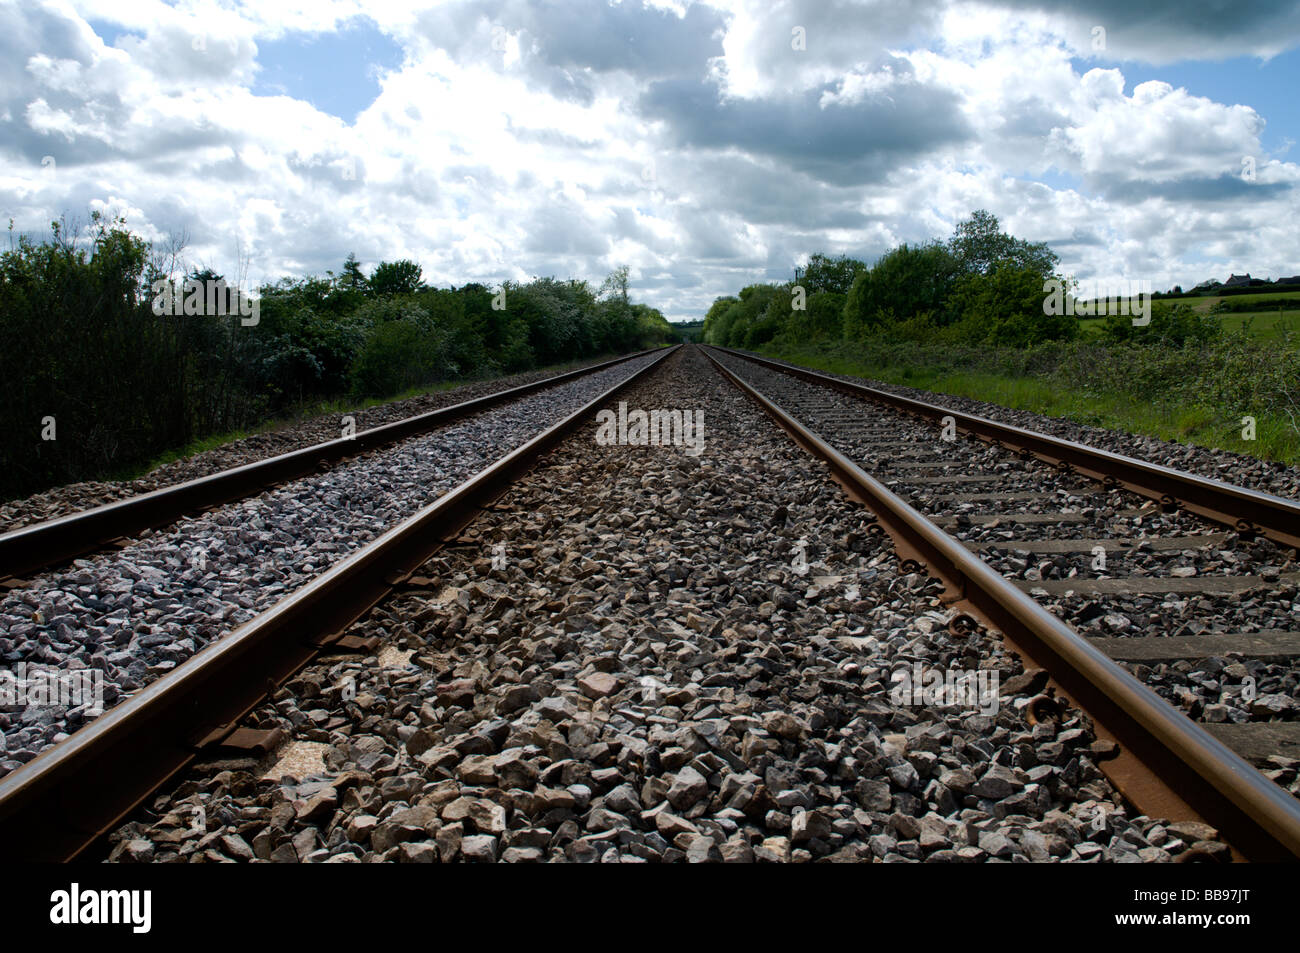 Low Perspective view of train tracks. Railway line looking down into distance. Stock Photo